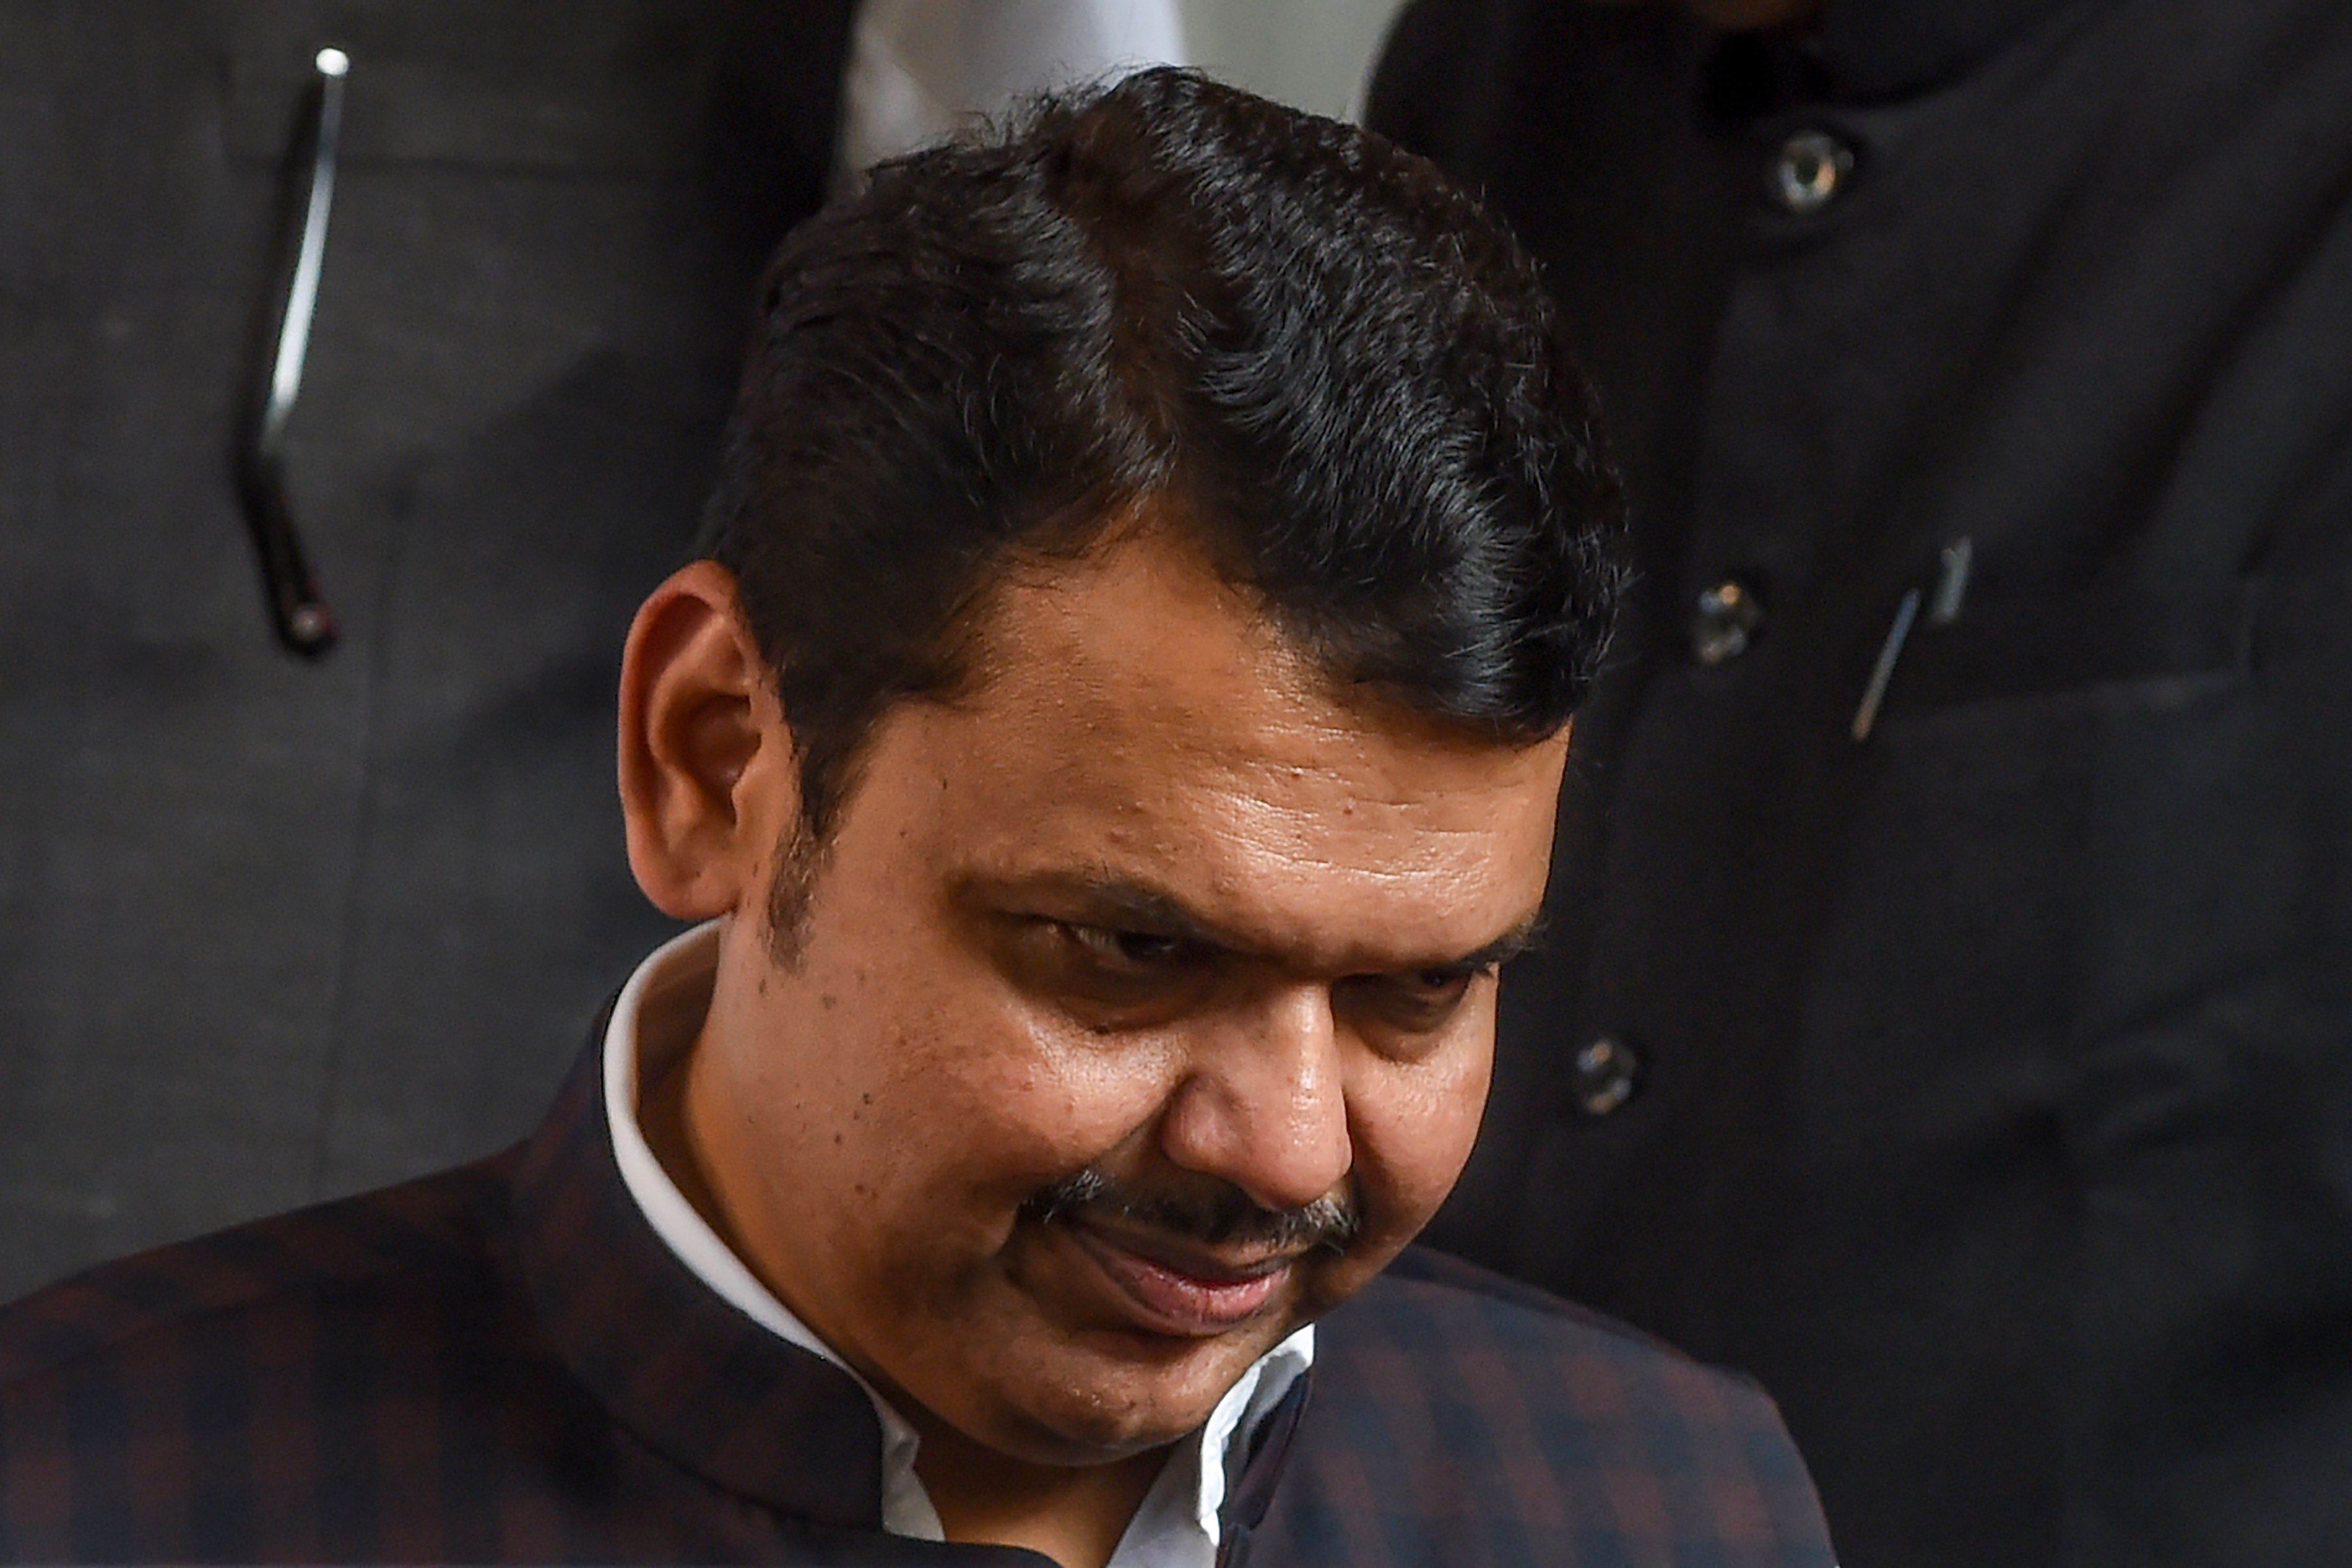 Fadnavis said, The Maharashtra chief minister should hold an urgent meeting with the Karnataka chief minister and enter into an agreement over-discharge of water from the Almatti dam located on the border of both the states." Credit: PTI File Photo